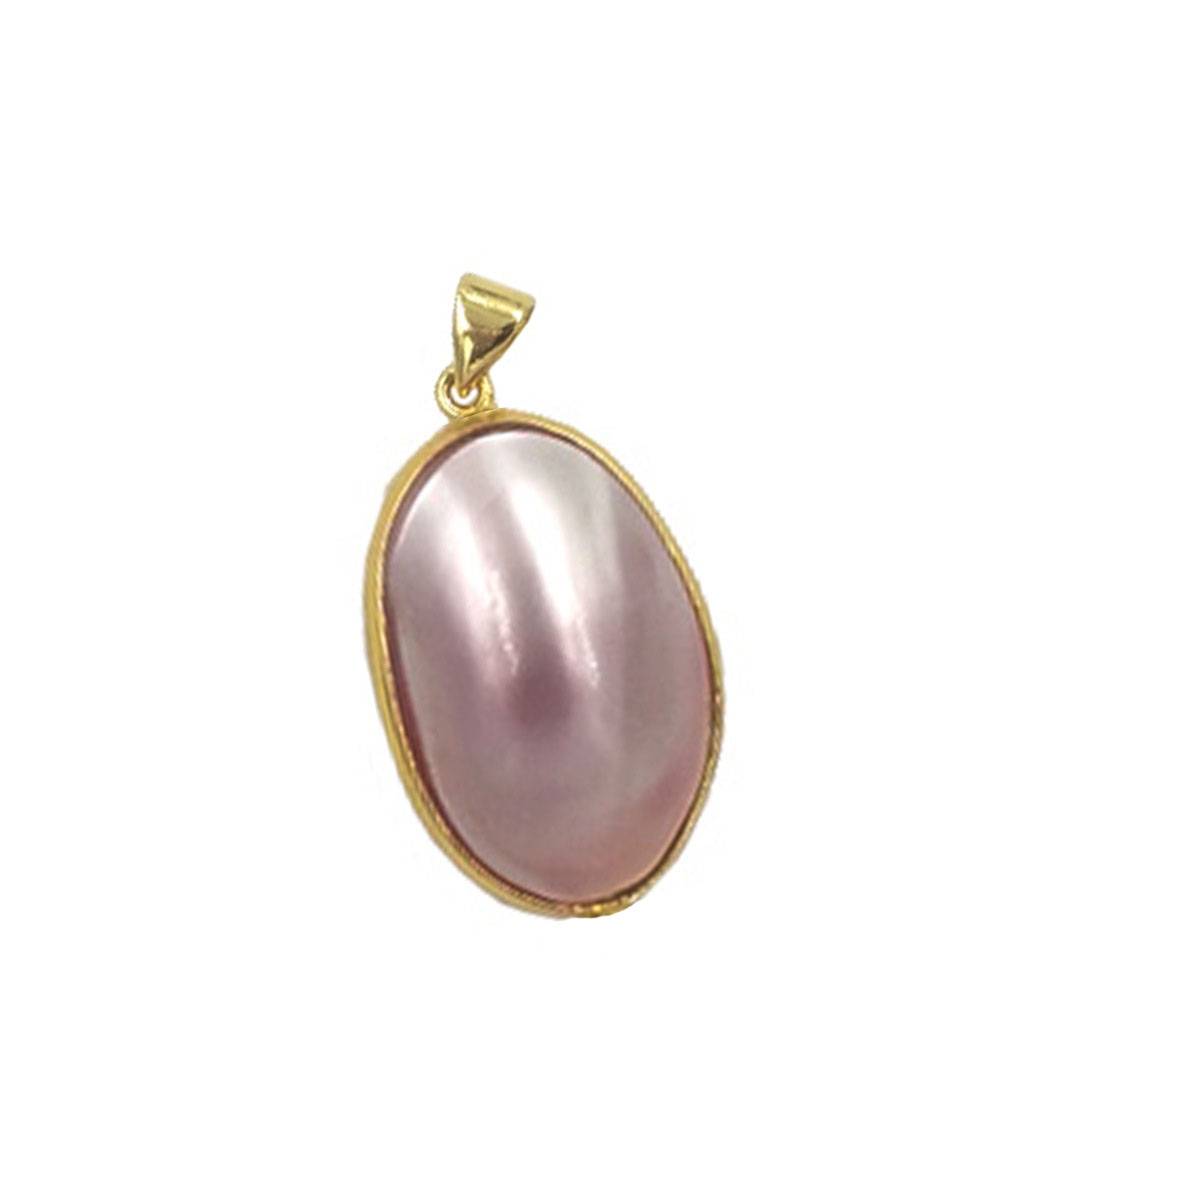 6:Small pink shell 13-15x19-21mm